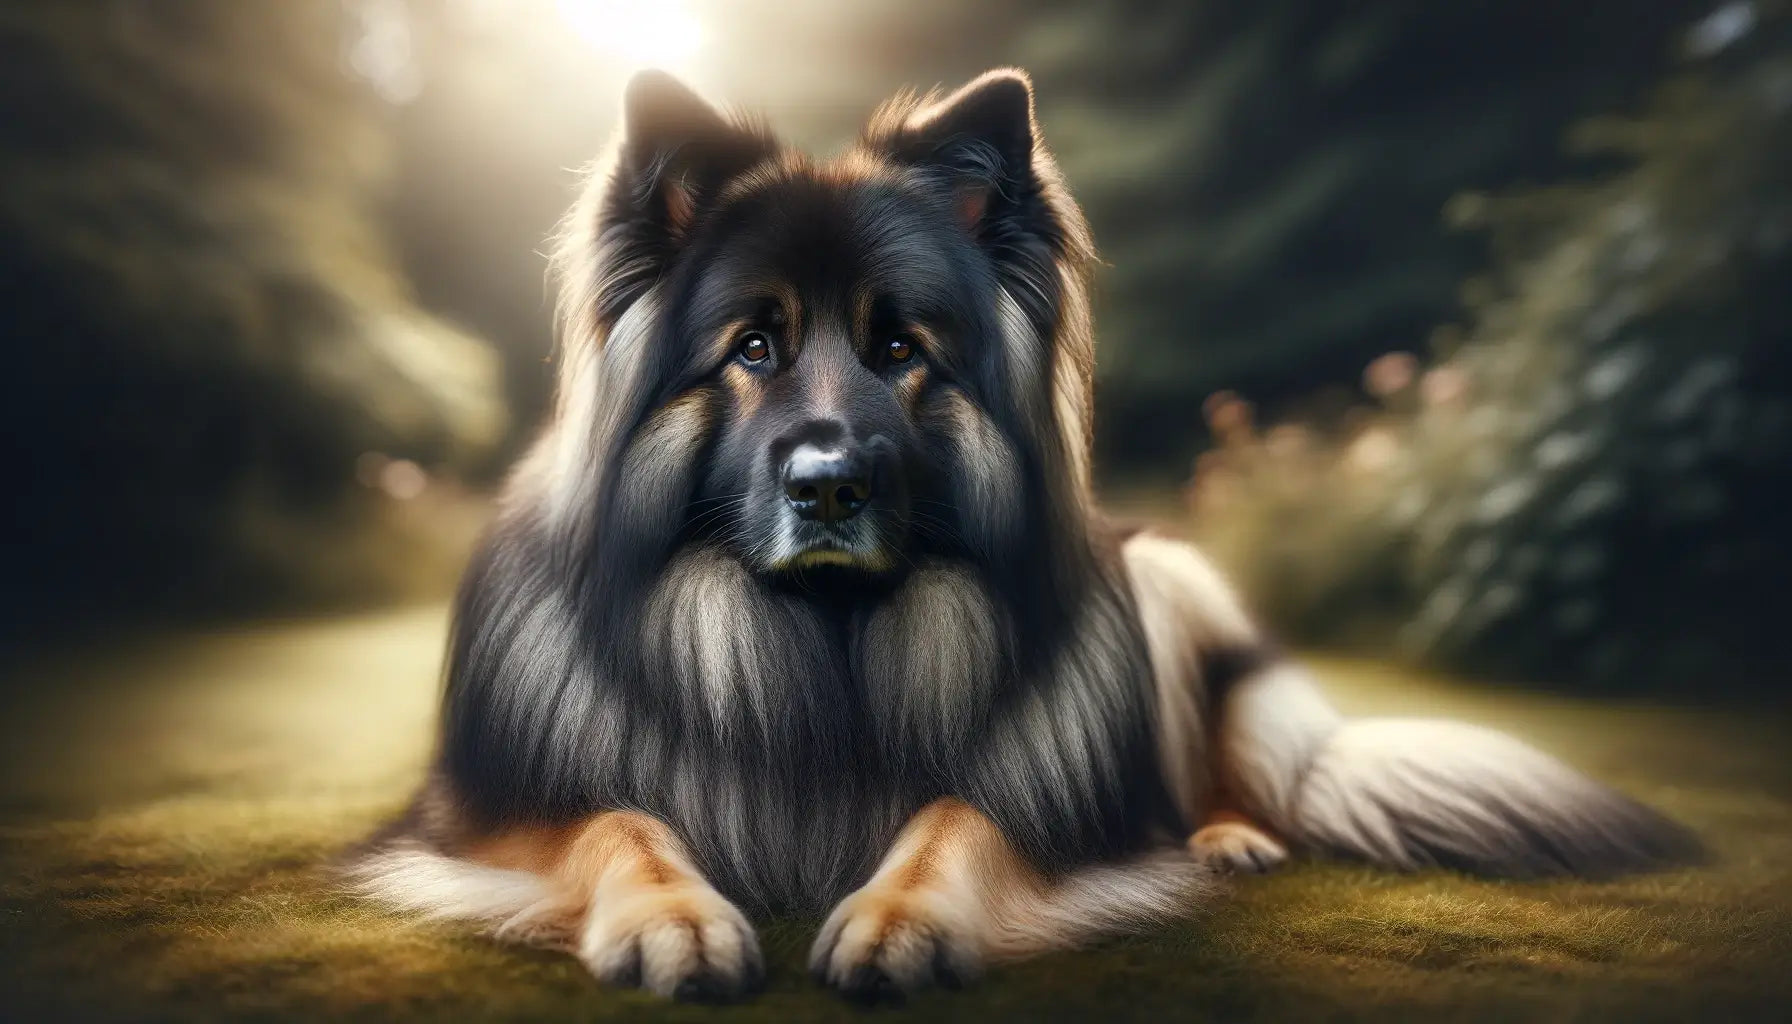 A Shiloh Shepherd lies calmly on the grass, showcasing its dense coat and thoughtful expression that reflect a quiet strength and watchful nature.